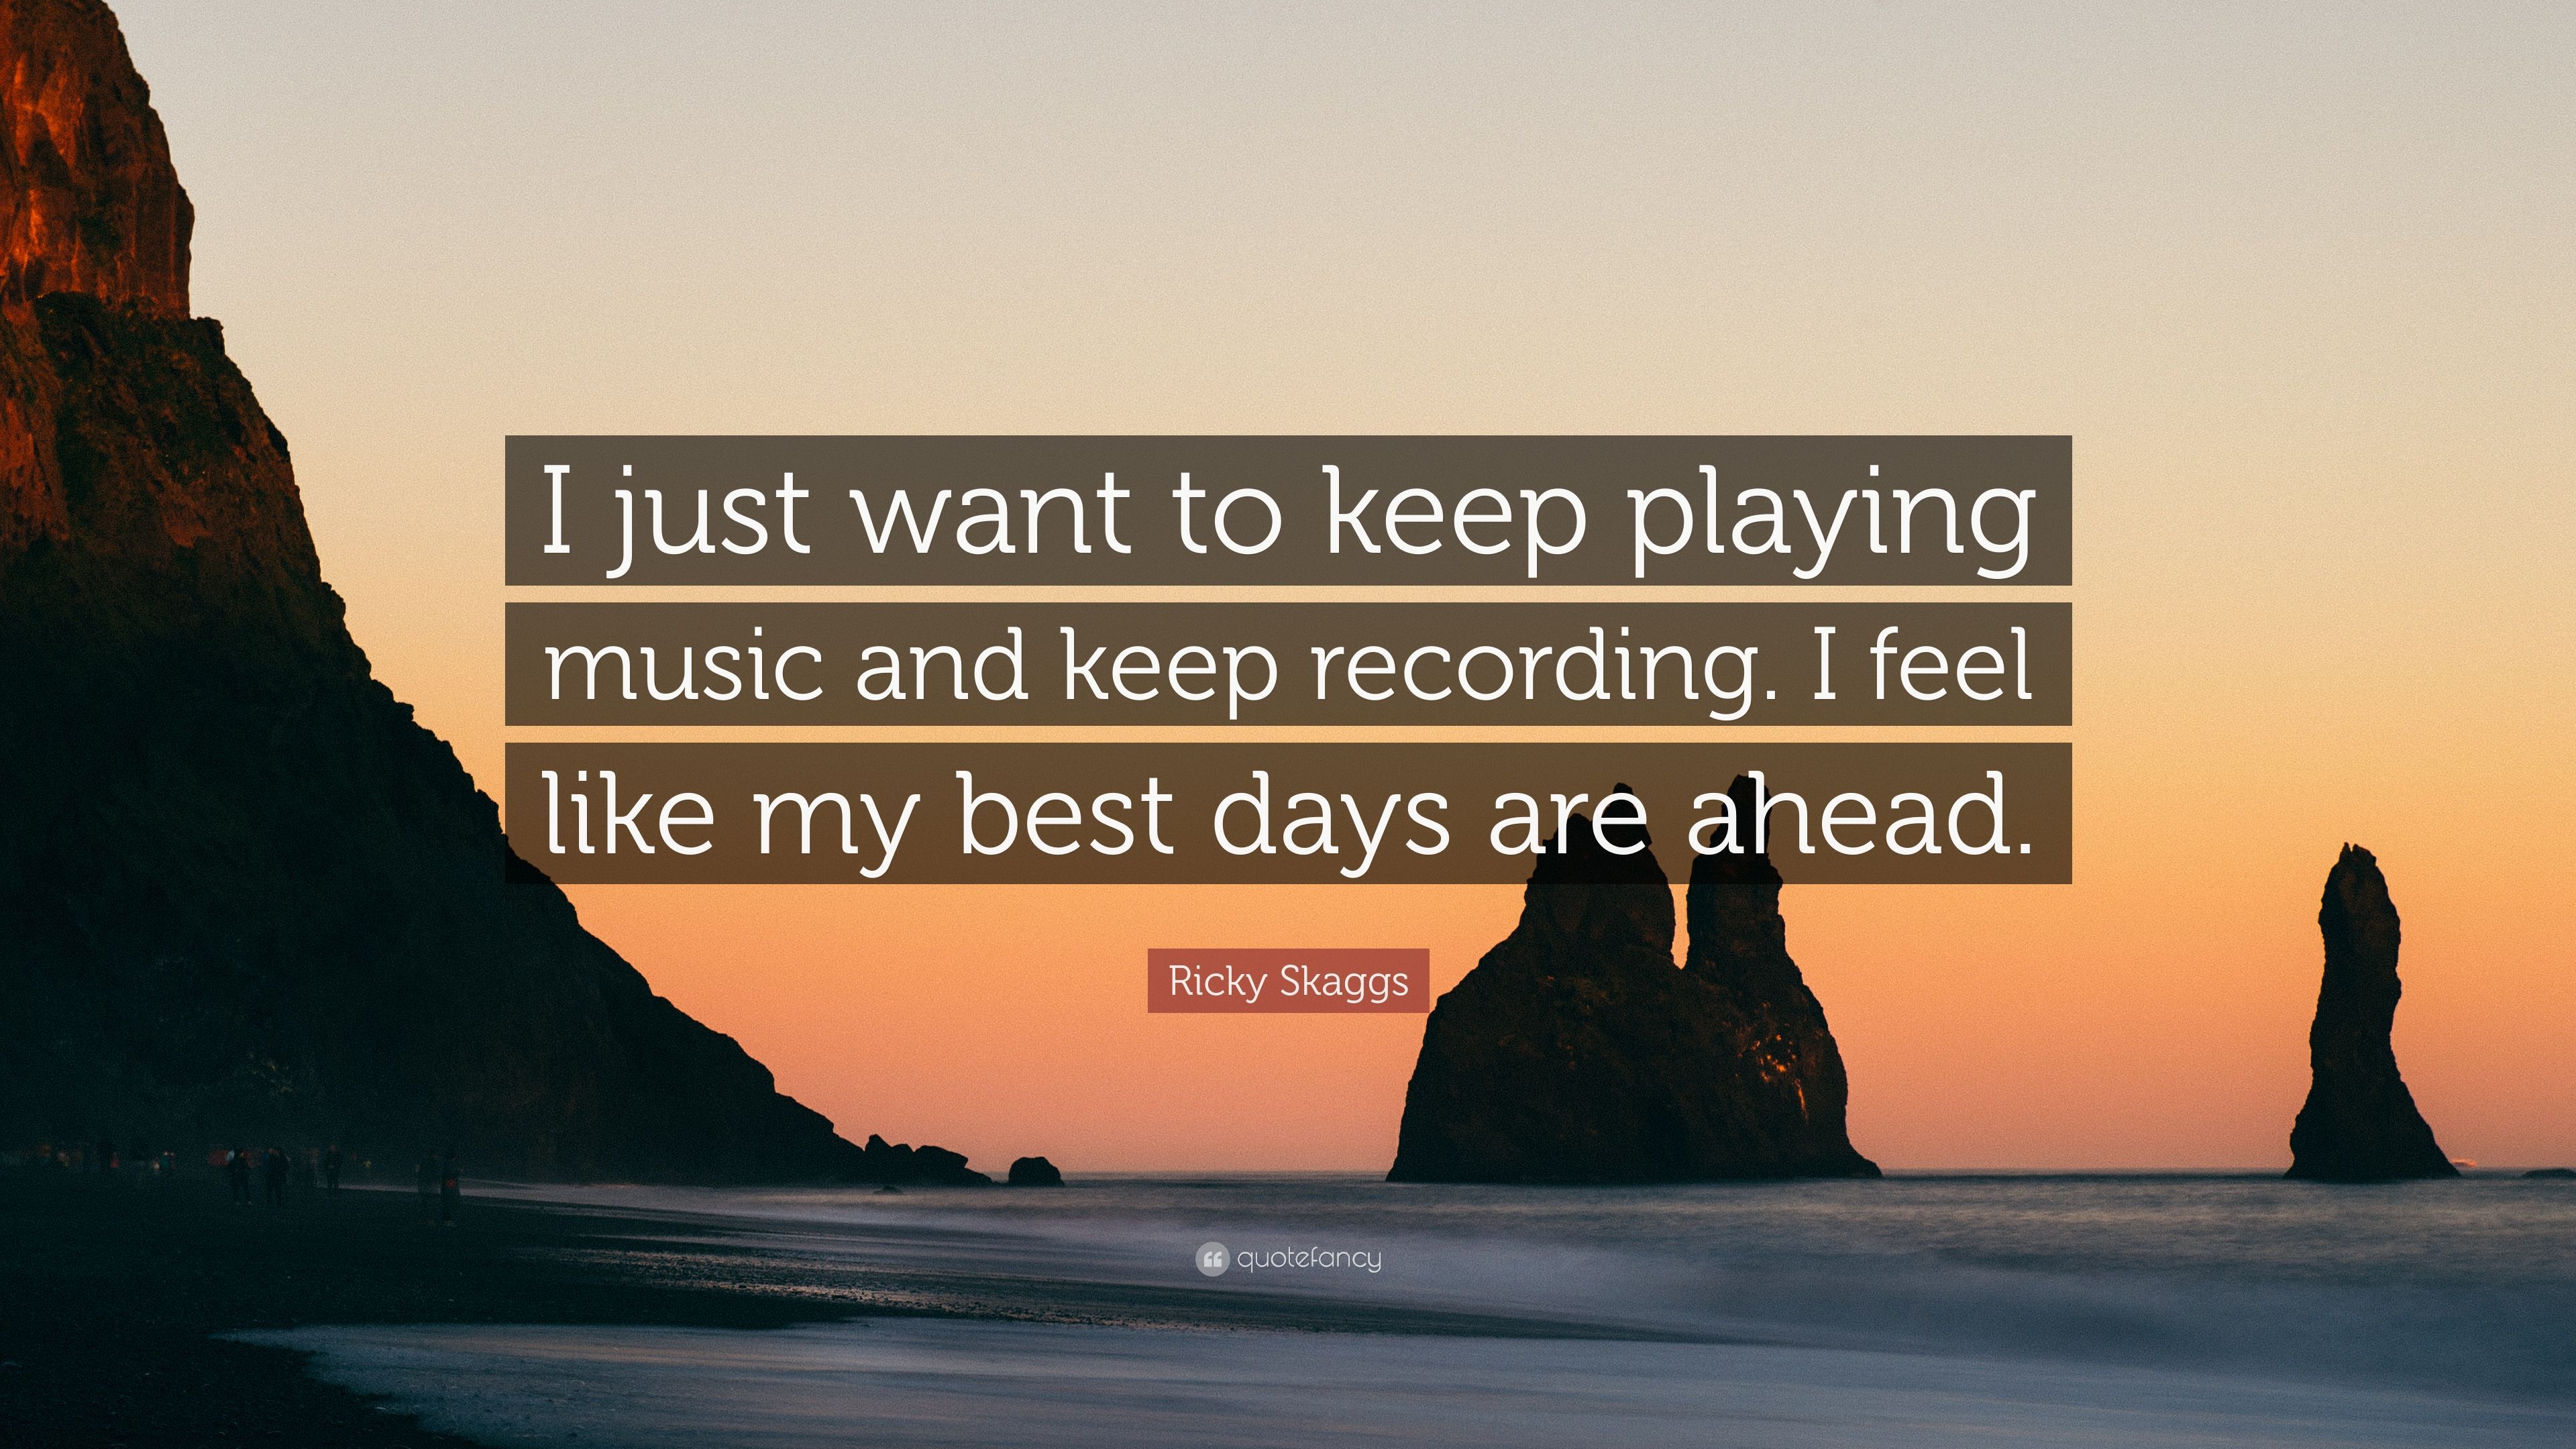 Ricky Skaggs Quote: “I just want to keep playing music and keep